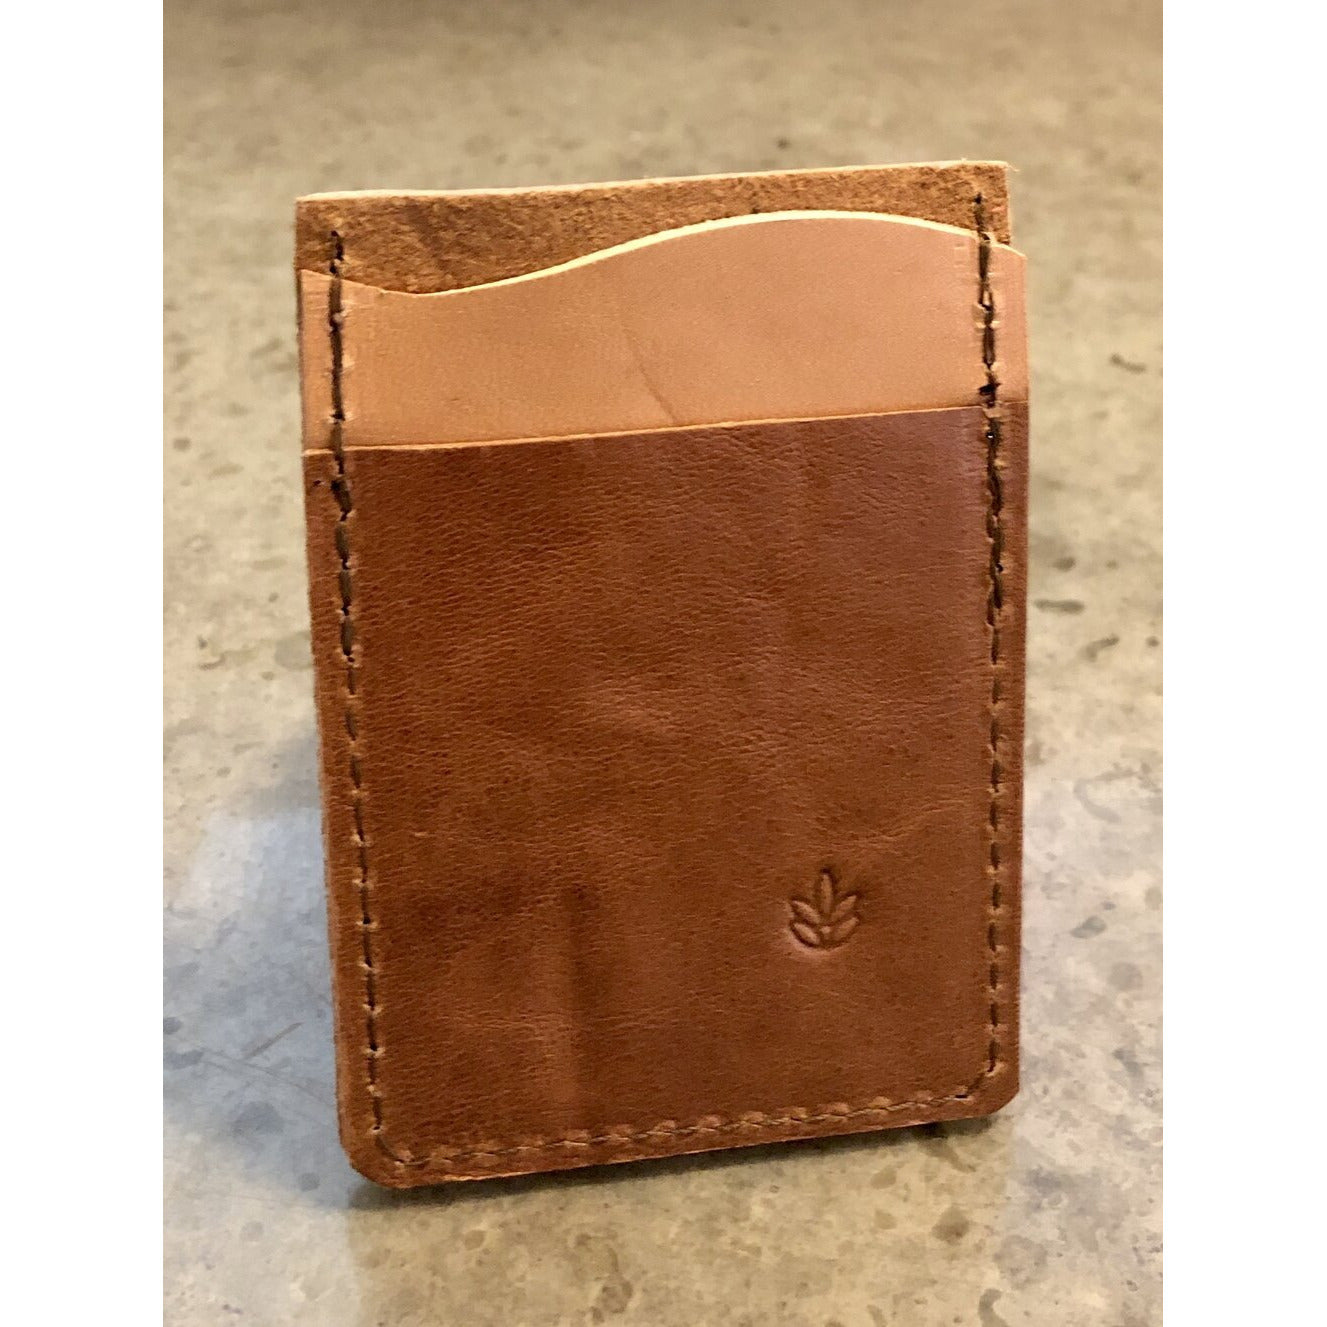 "Just the Essentials" Leather Card Wallet backside view in brown and light brown